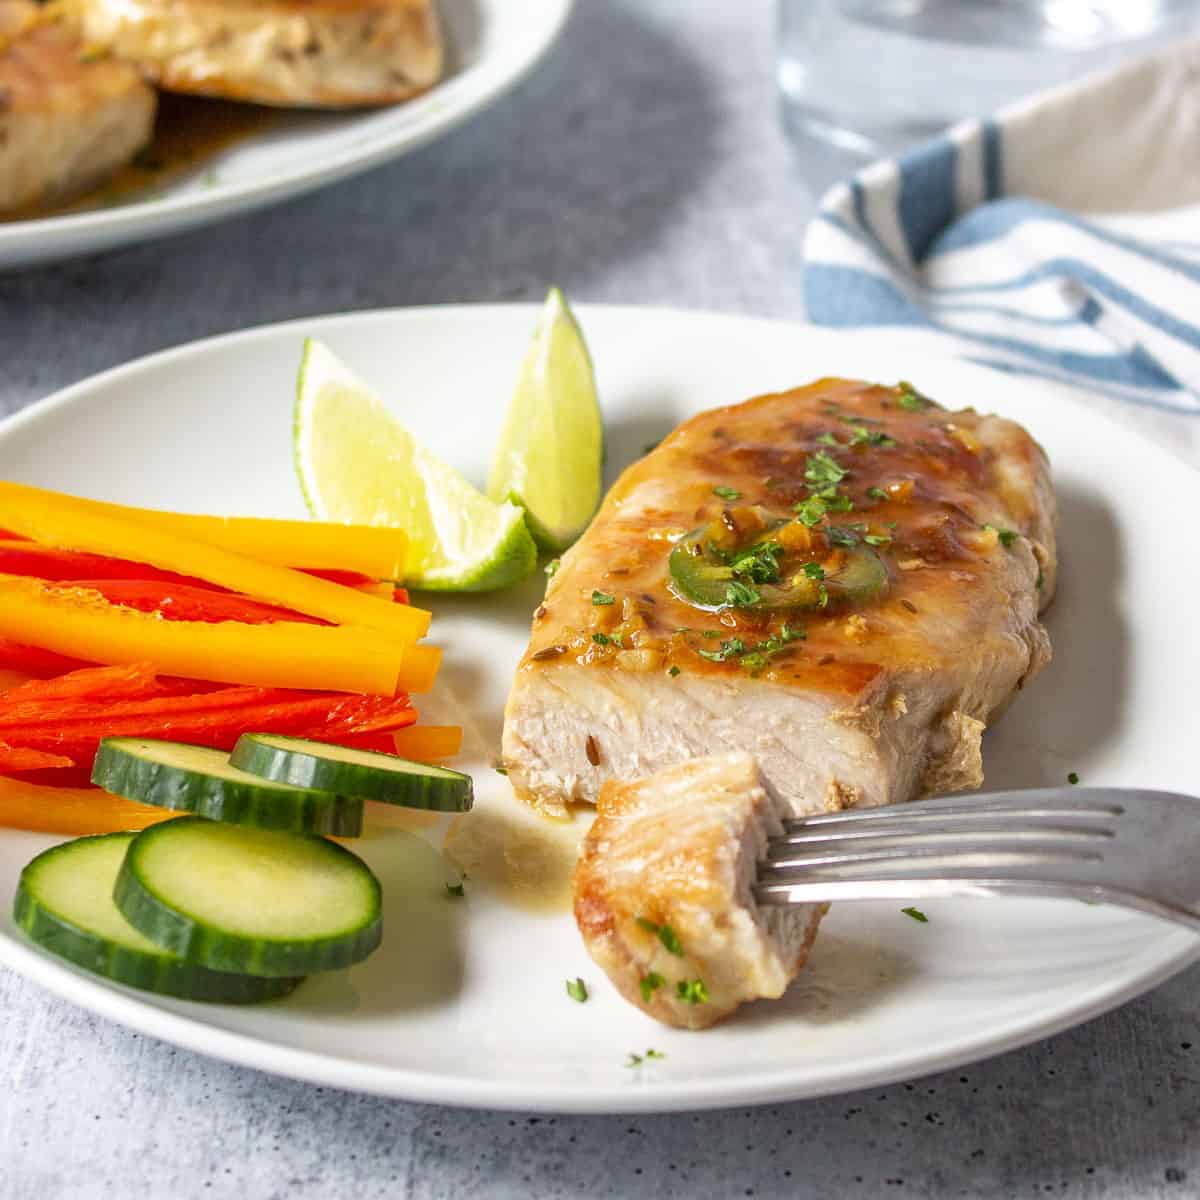 Boneless pork chop topped with a light sauce and jalapeno slices.